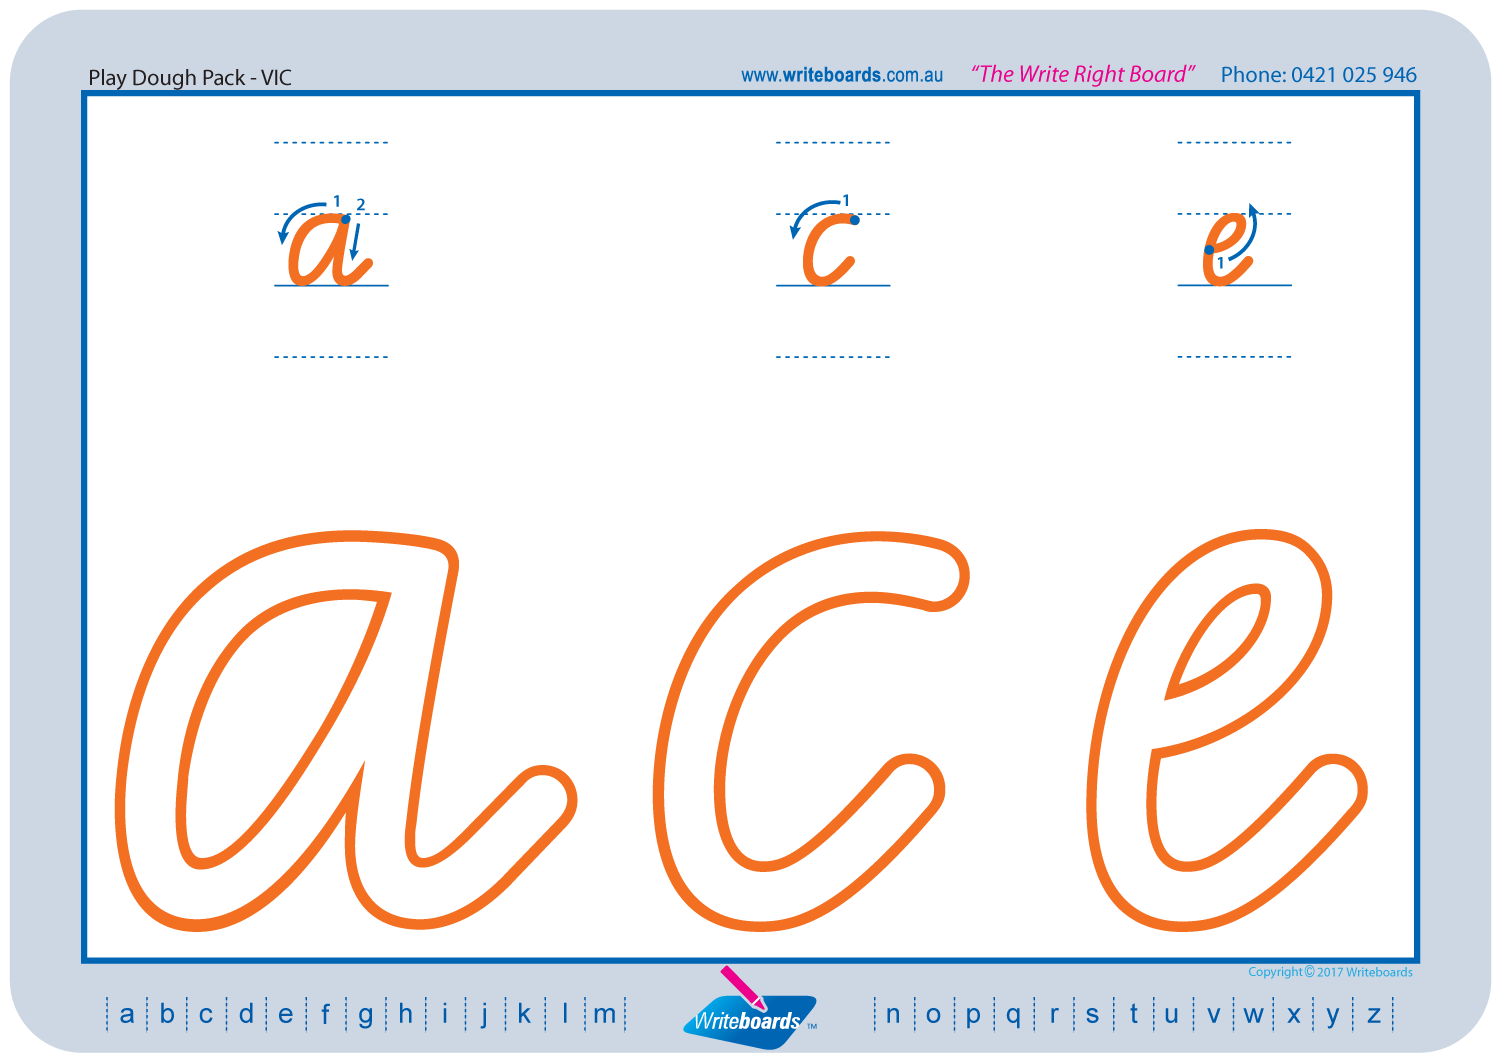 lower-case-alphabet-and-numbers-vic-modern-cursive-font-writeboards-children-s-writing-board